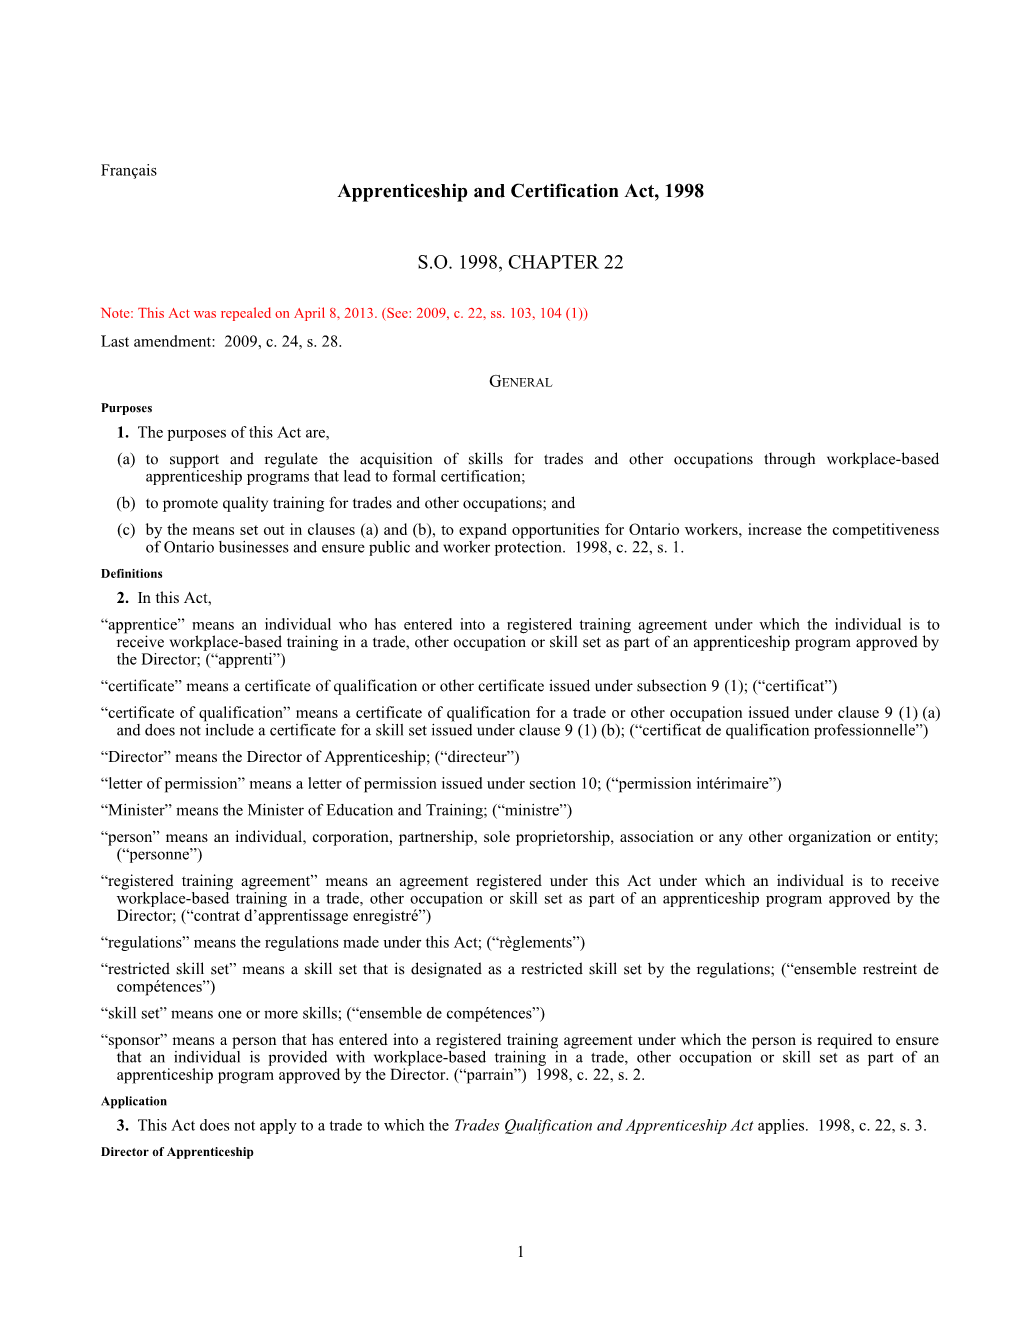 Apprenticeship and Certification Act, 1998, S.O. 1998, C. 22